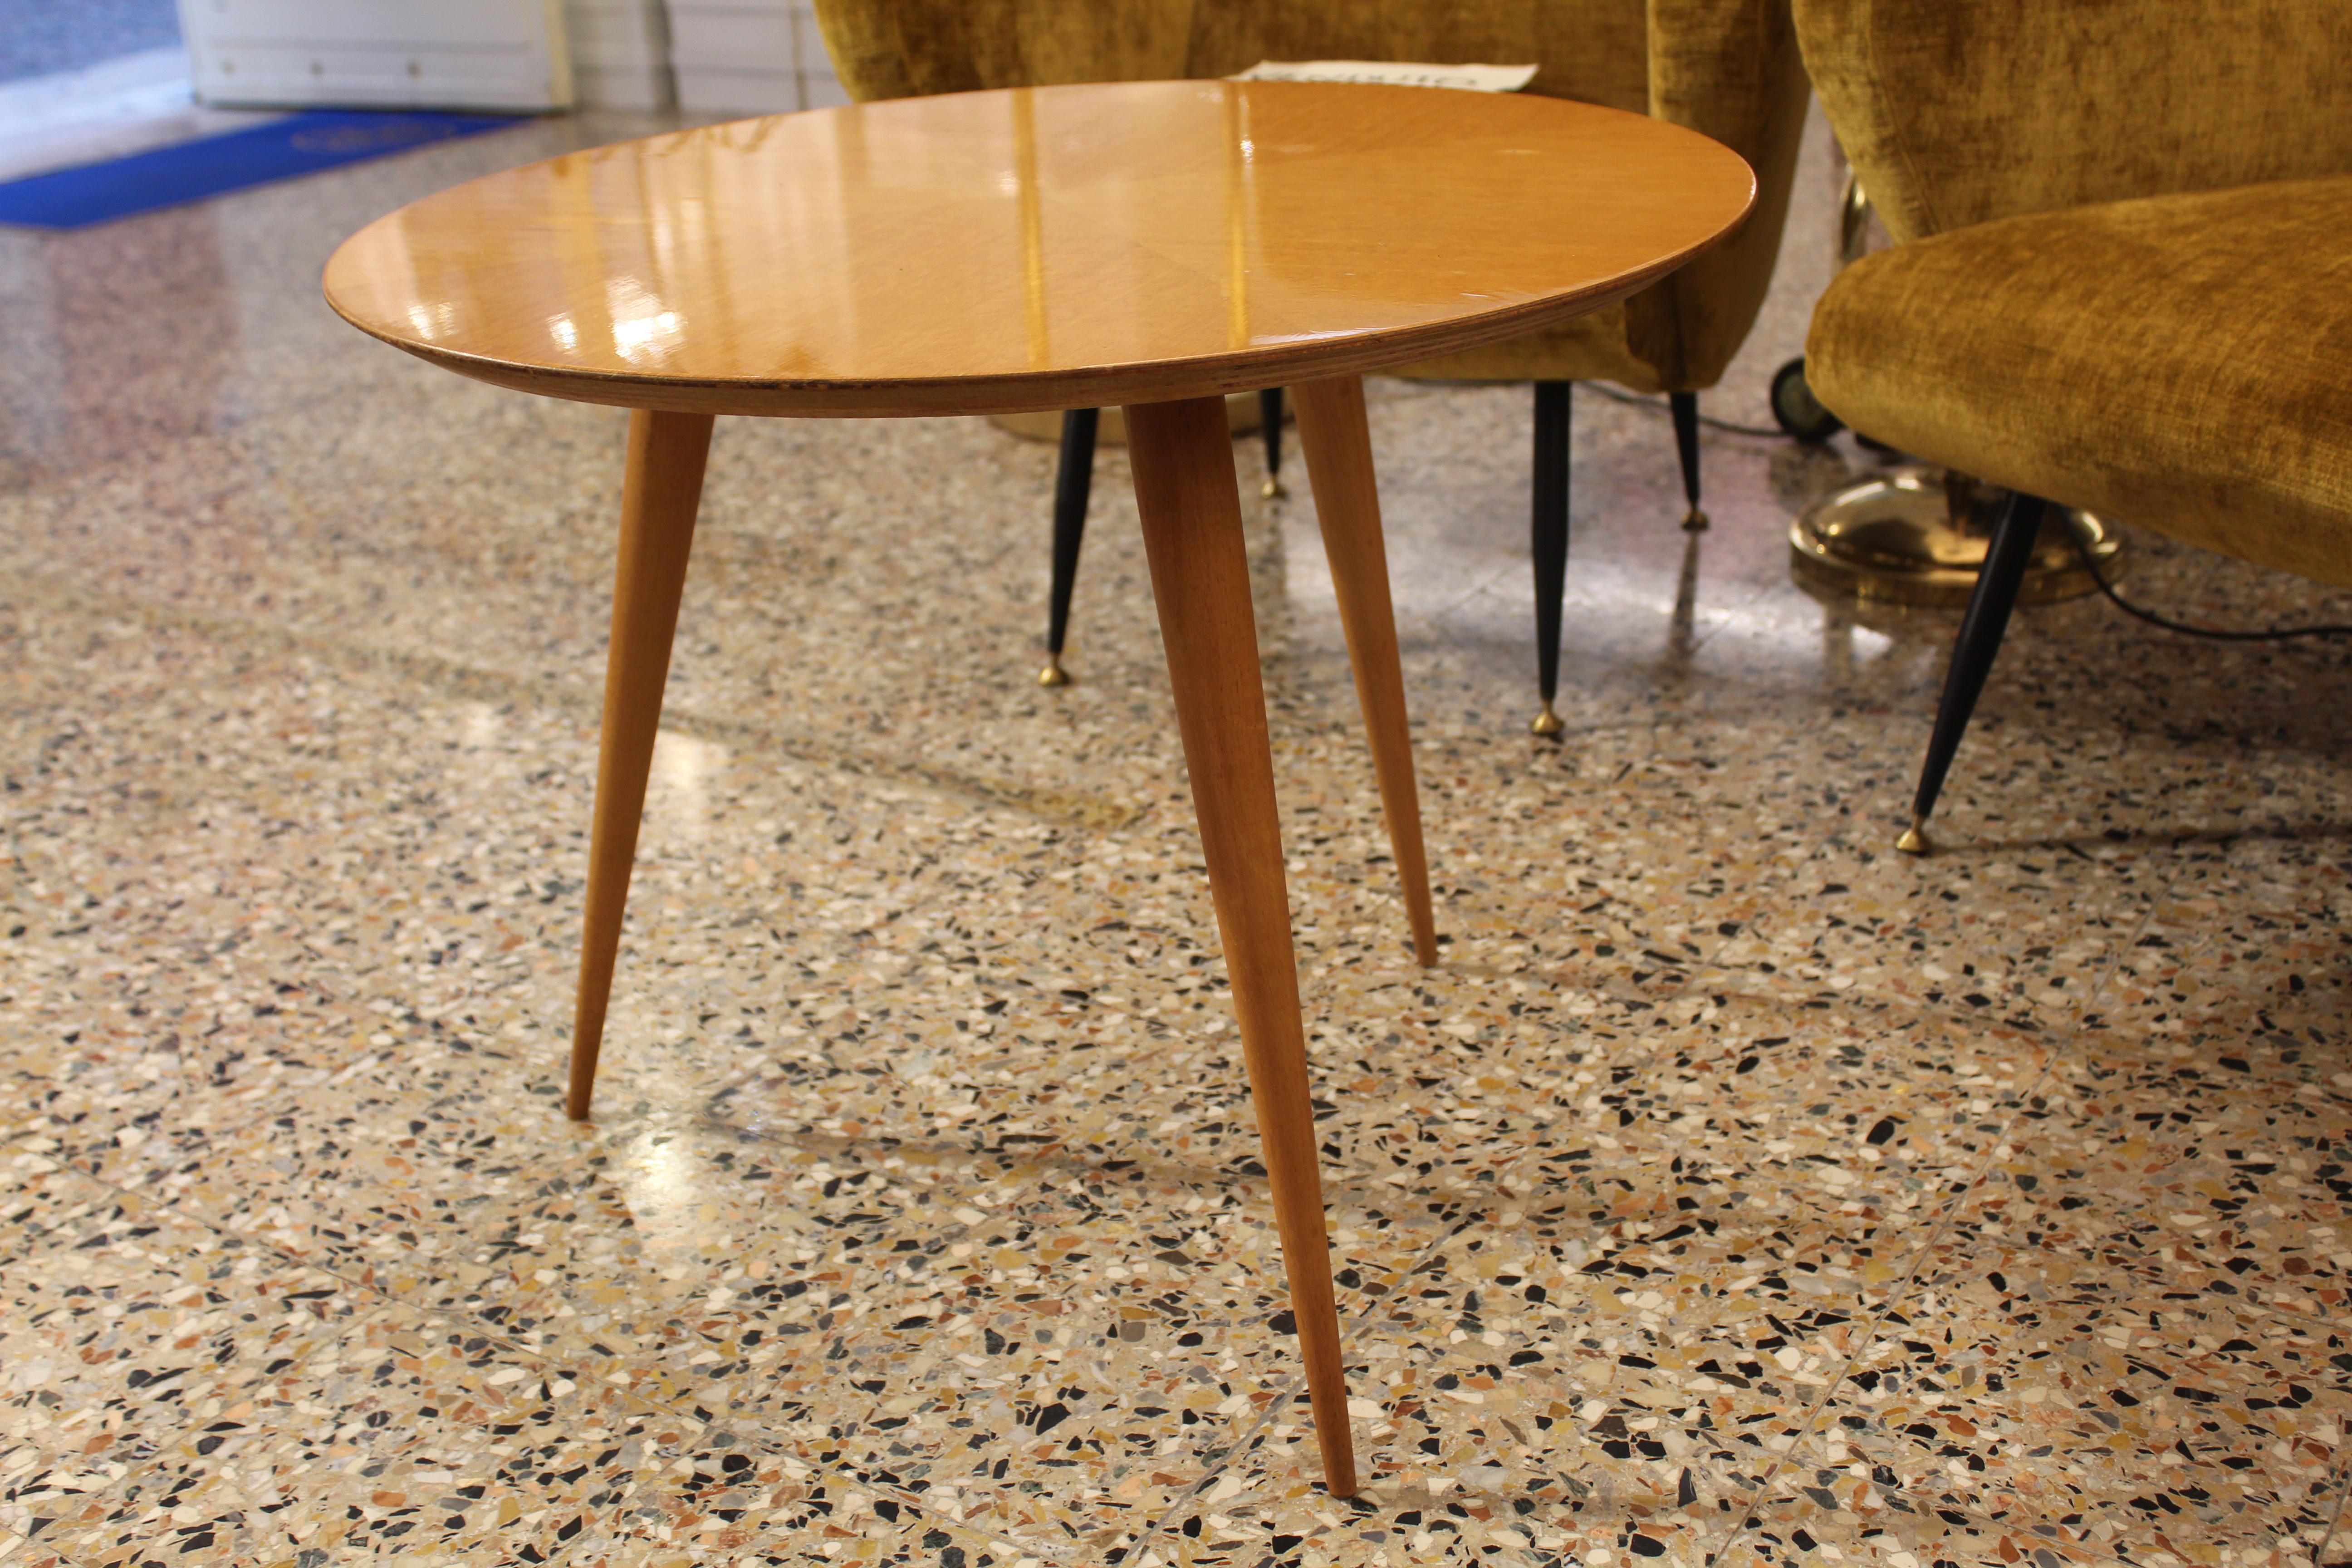 1950s cherrywood circular table, with three stiletto legs.

Made in Italy.
 